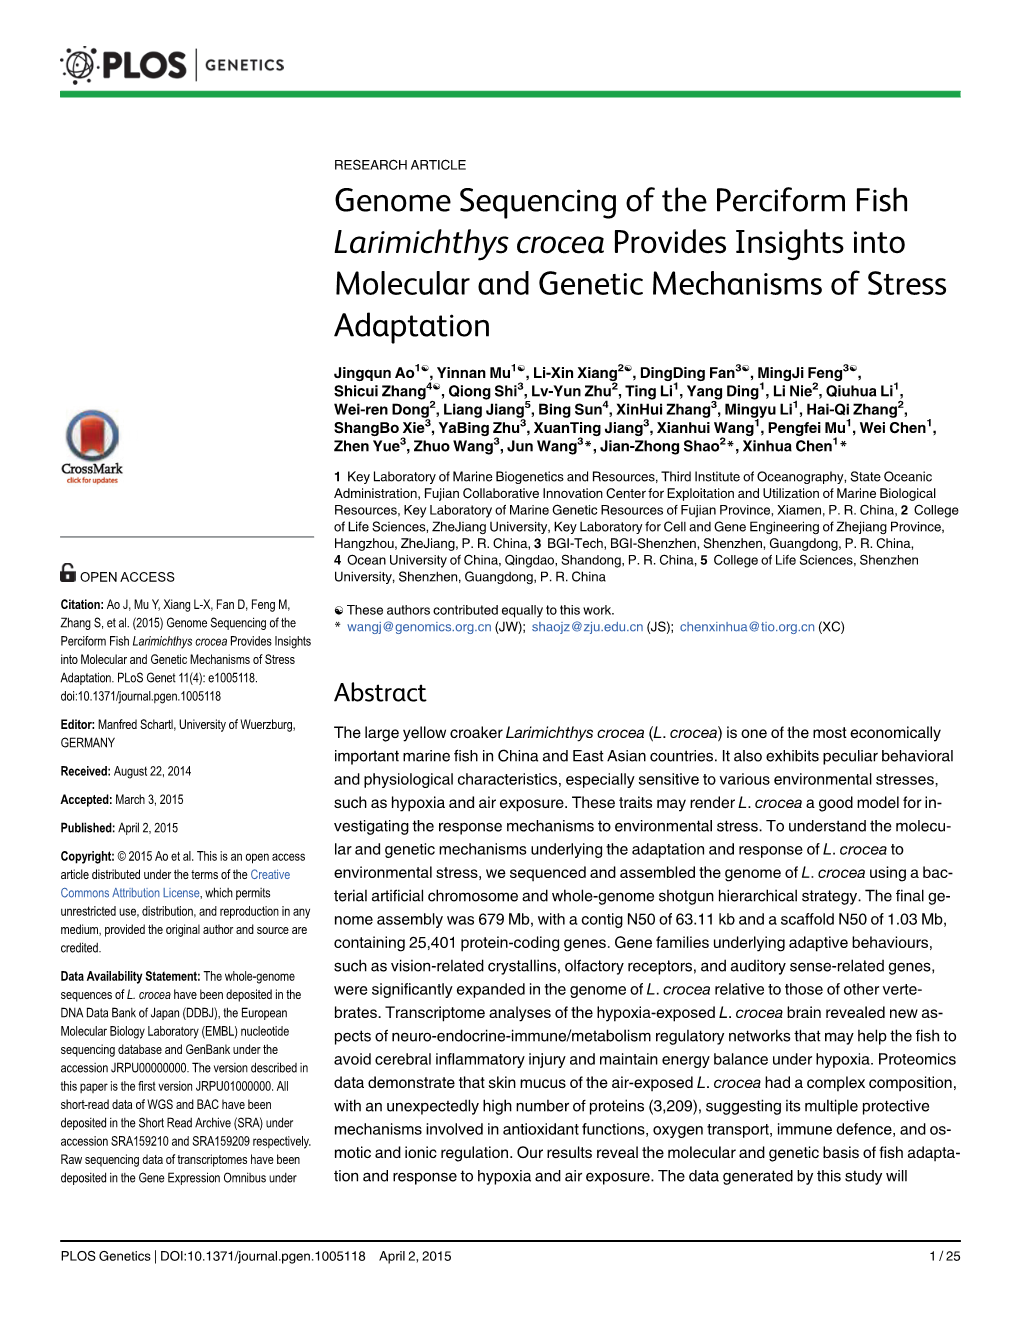 Genome Sequencing of the Perciform Fish Larimichthys Crocea Provides Insights Into Molecular and Genetic Mechanisms of Stress Adaptation